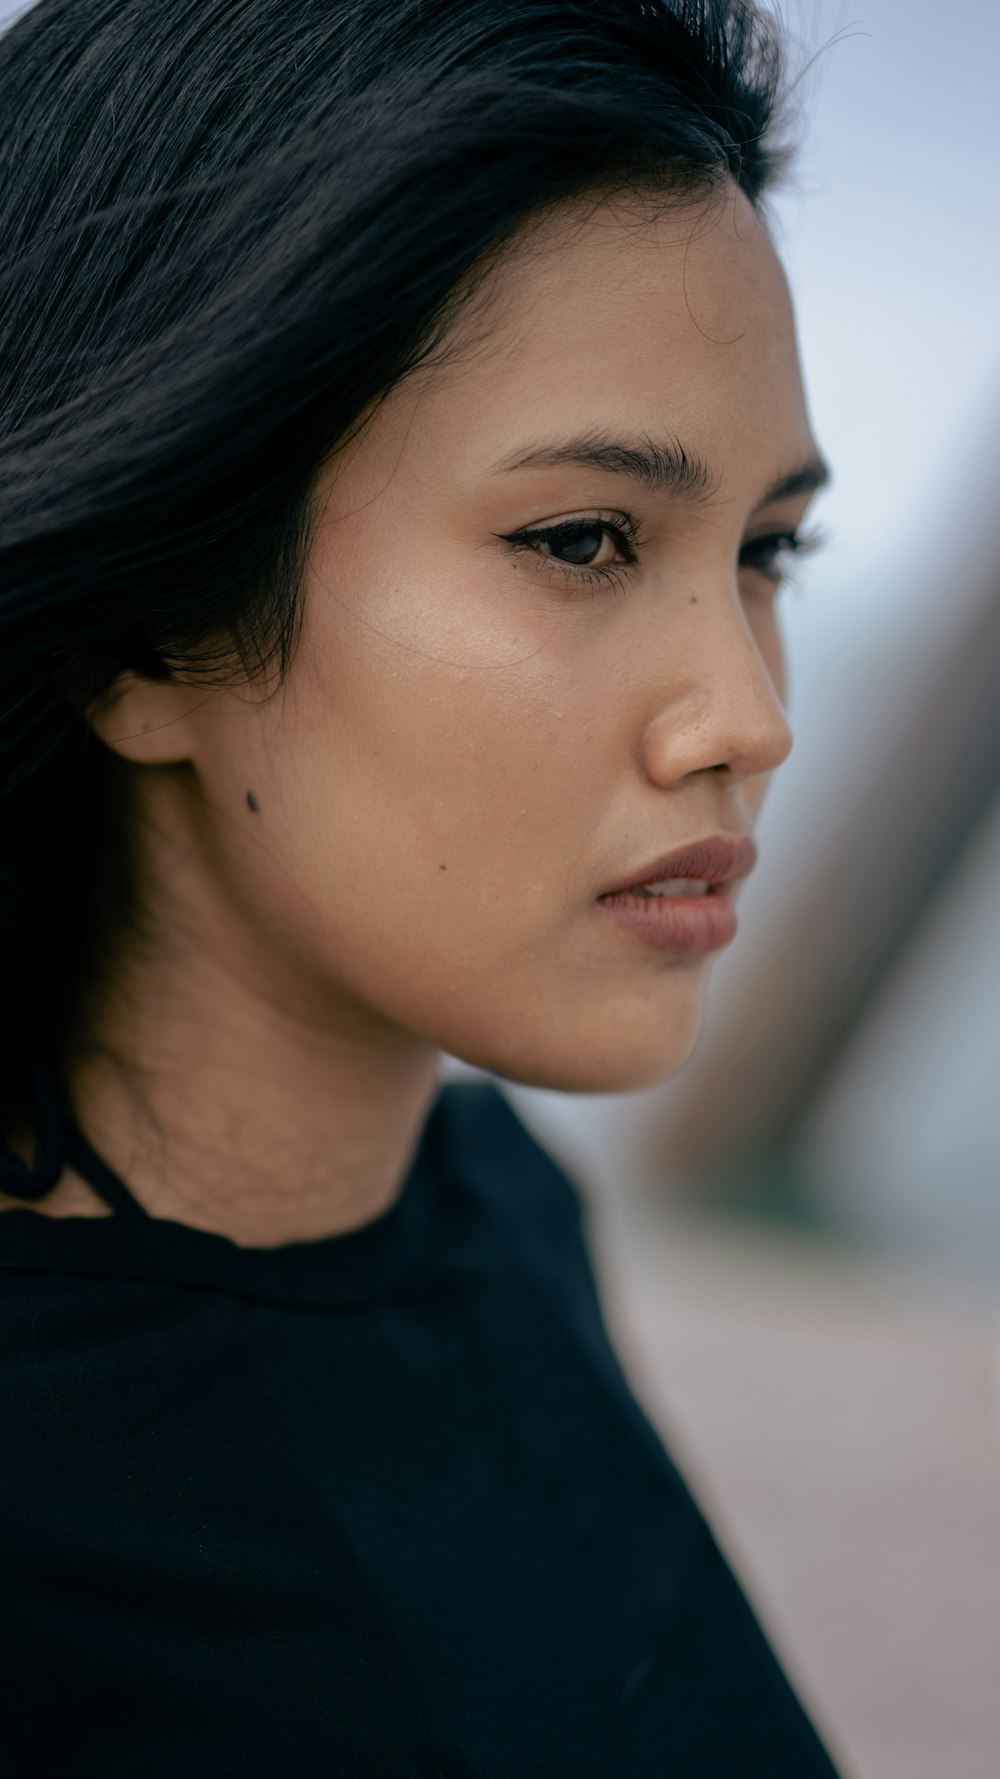 a close up of a person wearing a black shirt